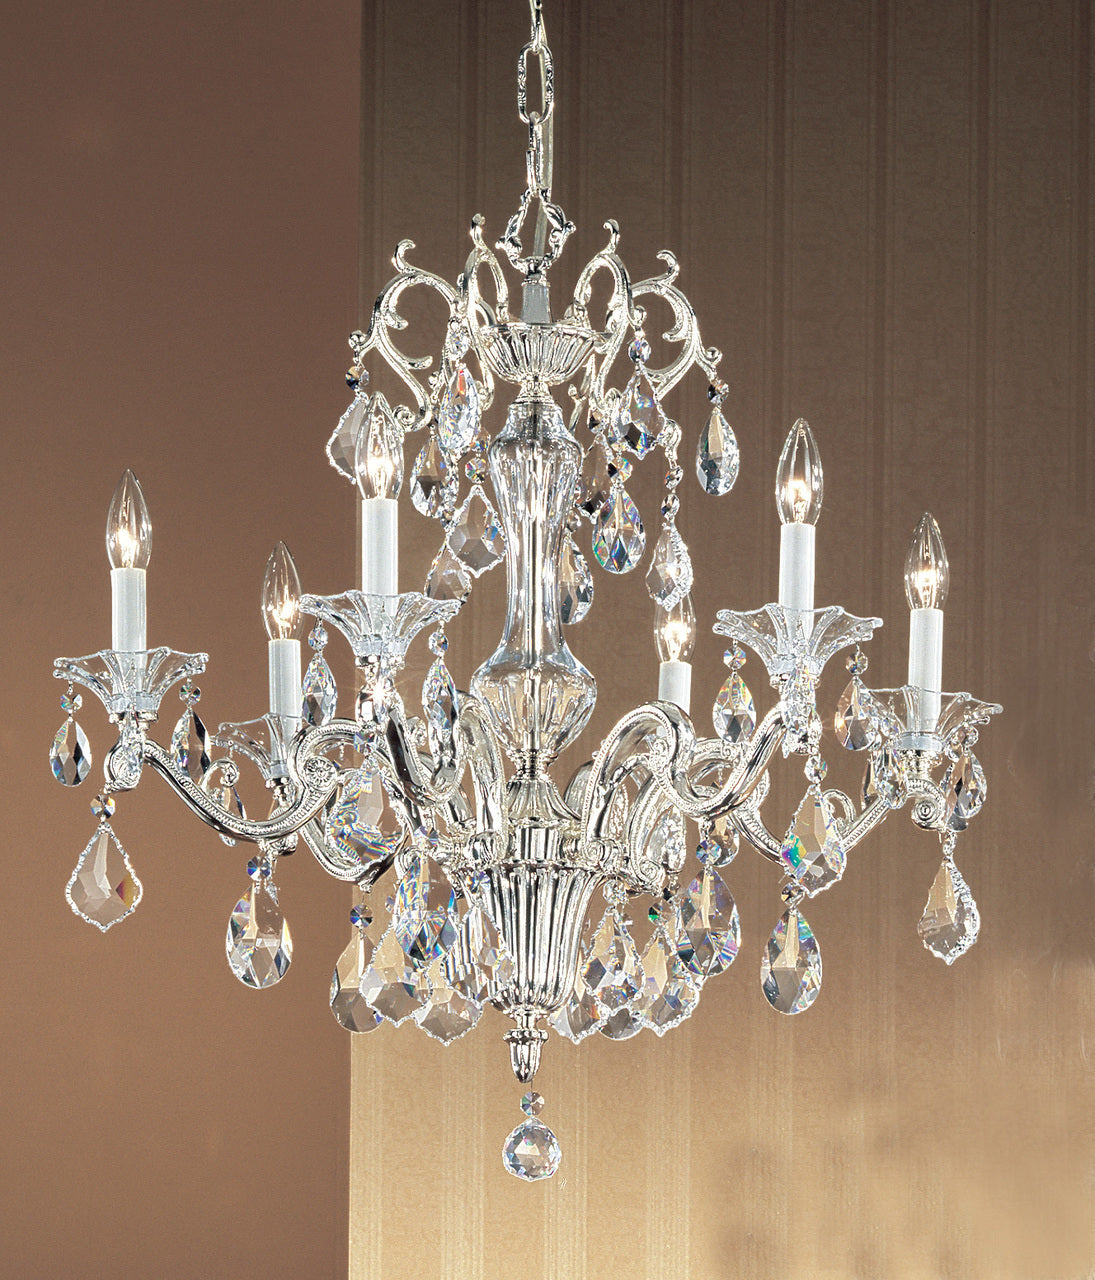 Classic Lighting 57106 SP SC Via Firenze Crystal Chandelier in Silver (Imported from Spain)